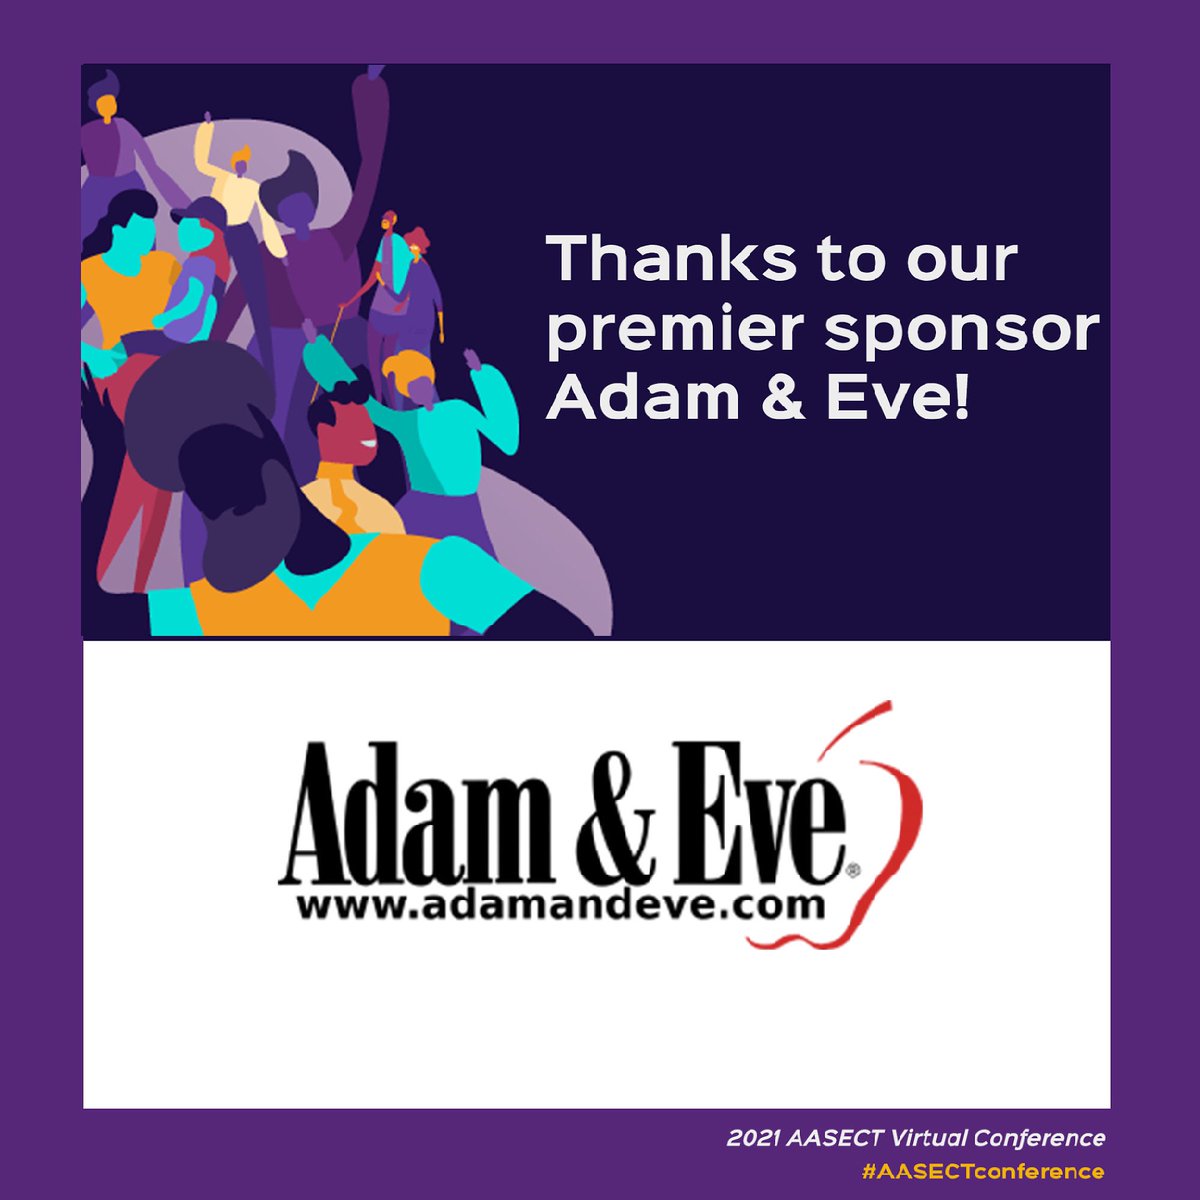 Giant shoutout and sincerest thank you to our premier sponsor @adamandeve. Your support of the #aasectconference means the world to us 💜🧡💛